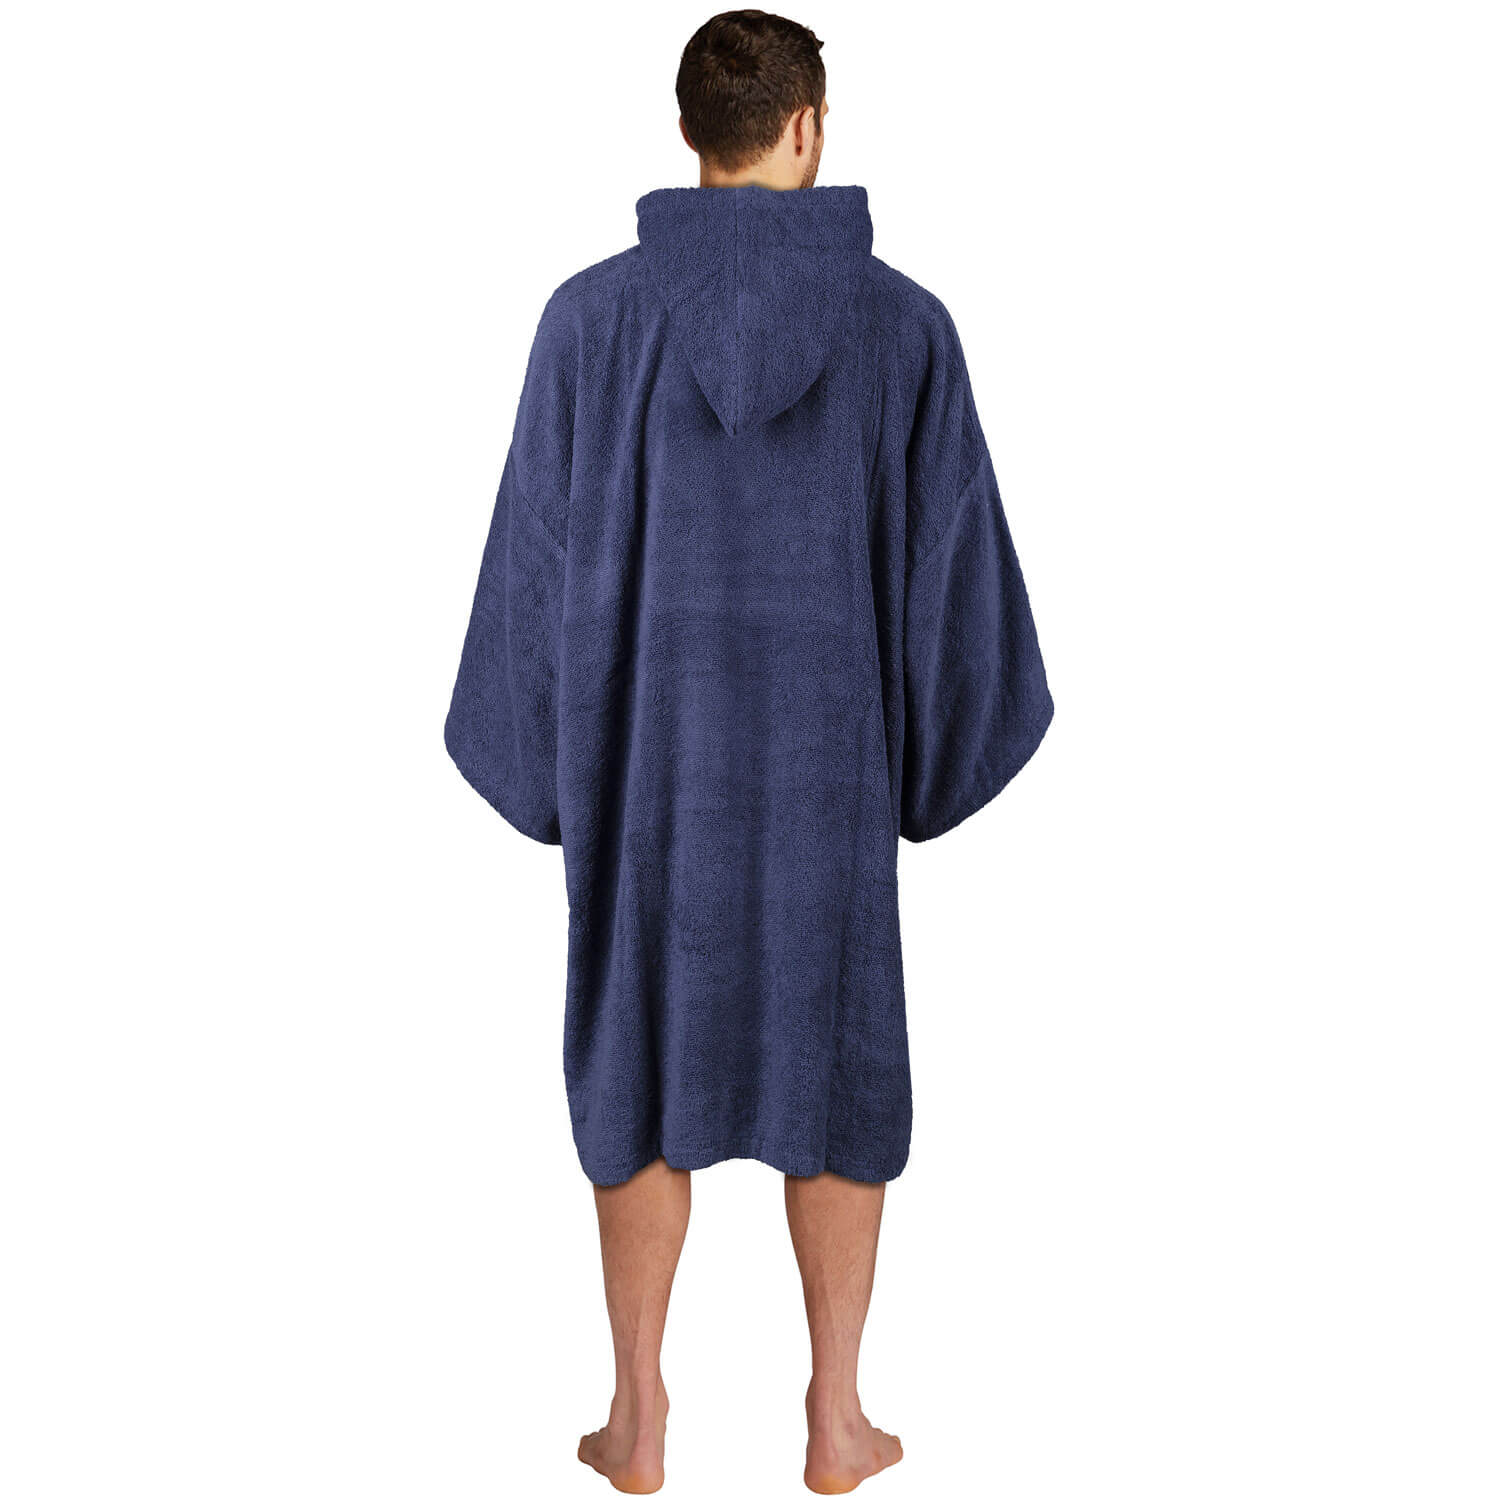 The Home Collection Adult Long Sleeve Poncho - Medium - Navy 2 Shaws Department Stores